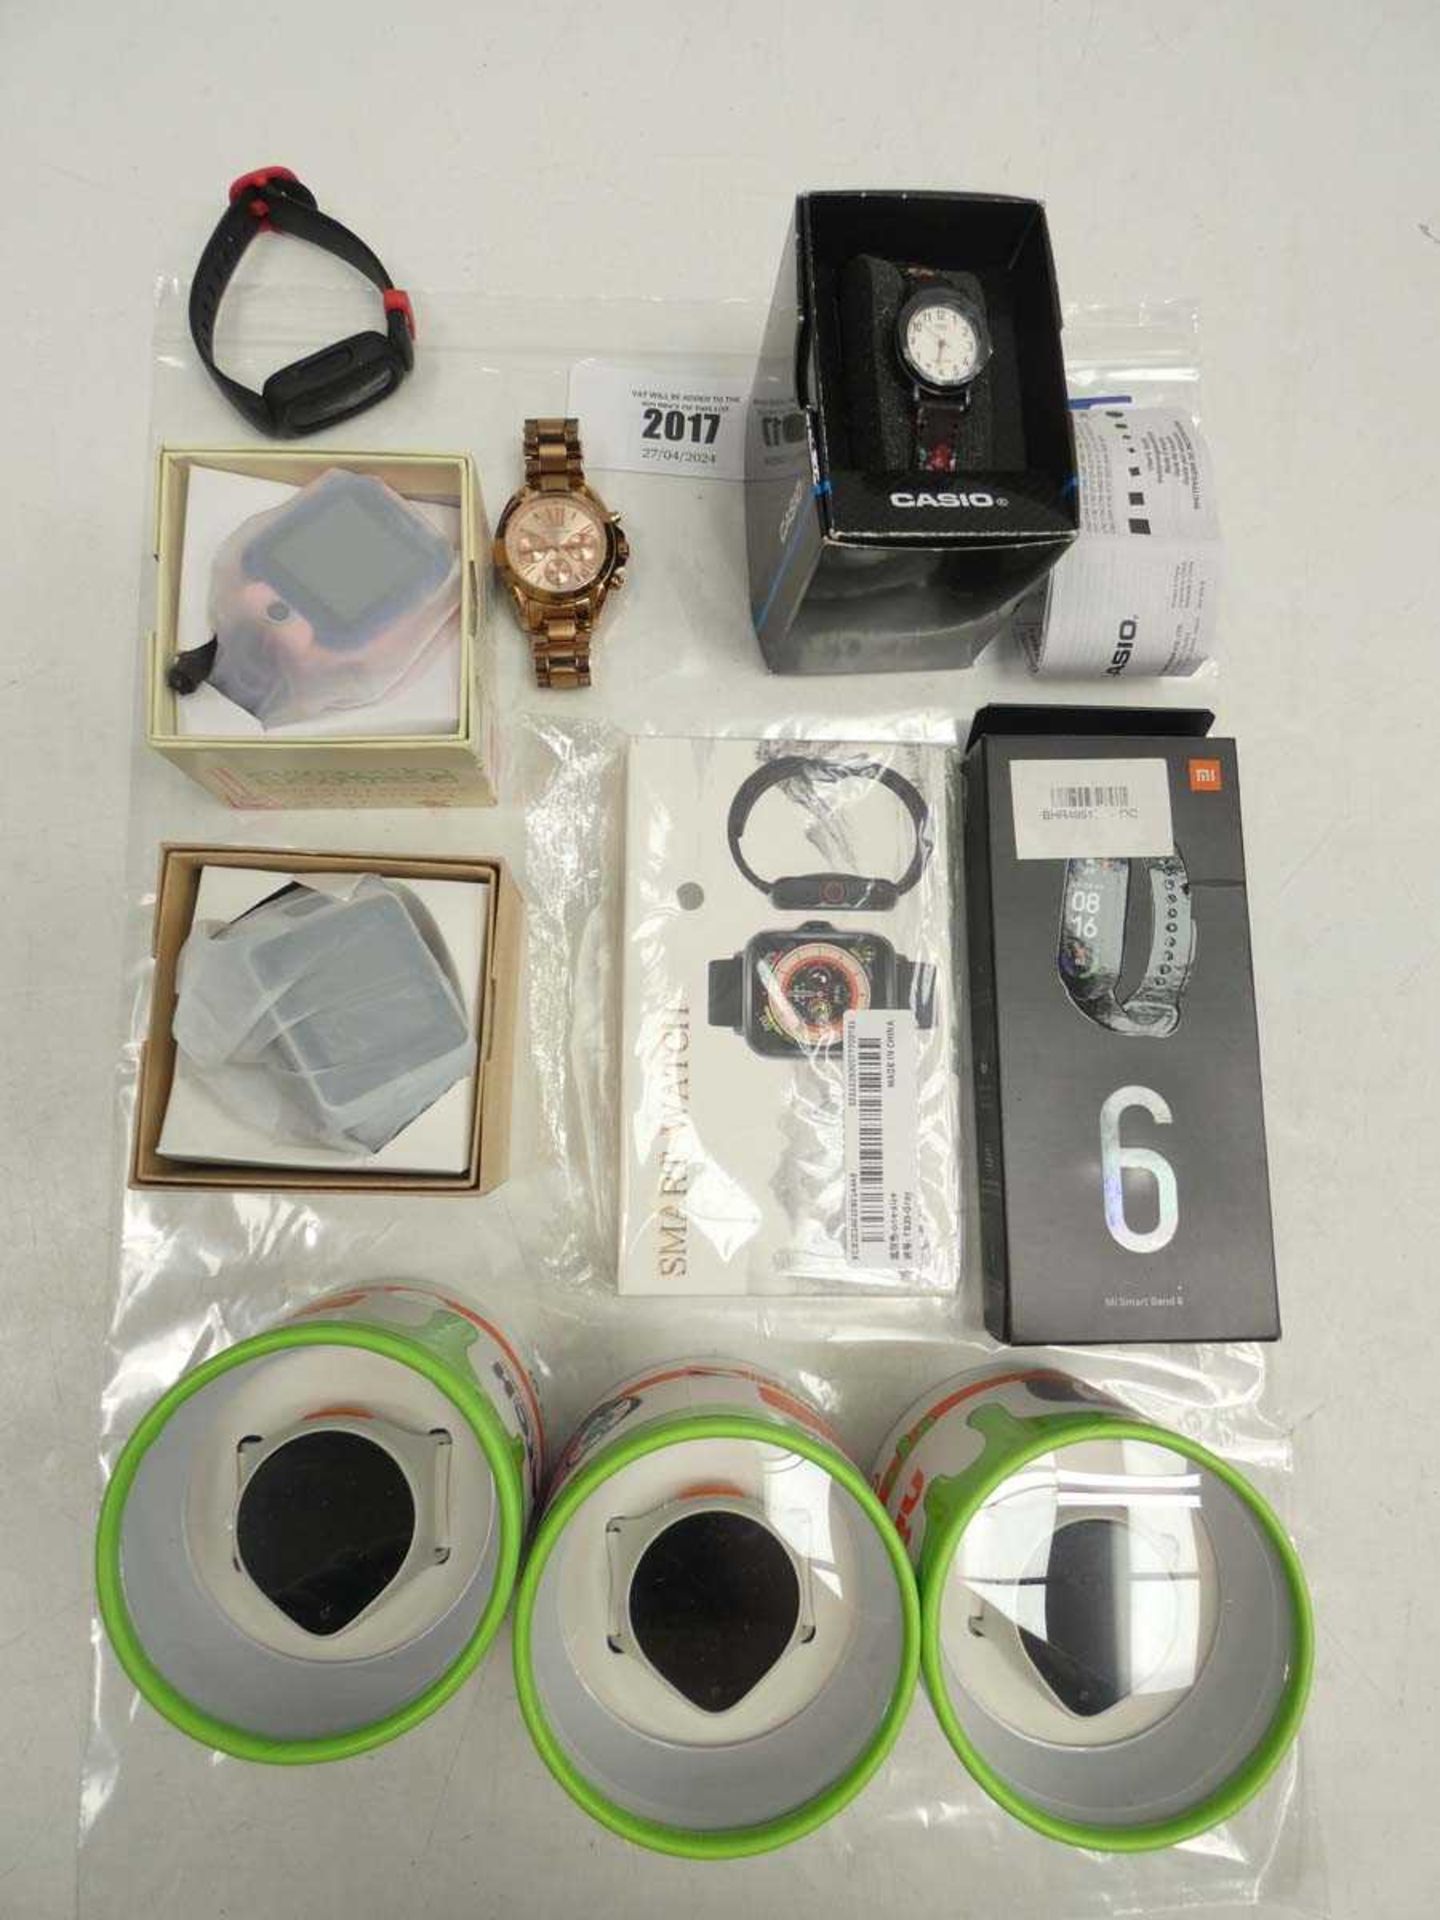 +VAT Michael Kors wristwatch and other watches/smartwatches